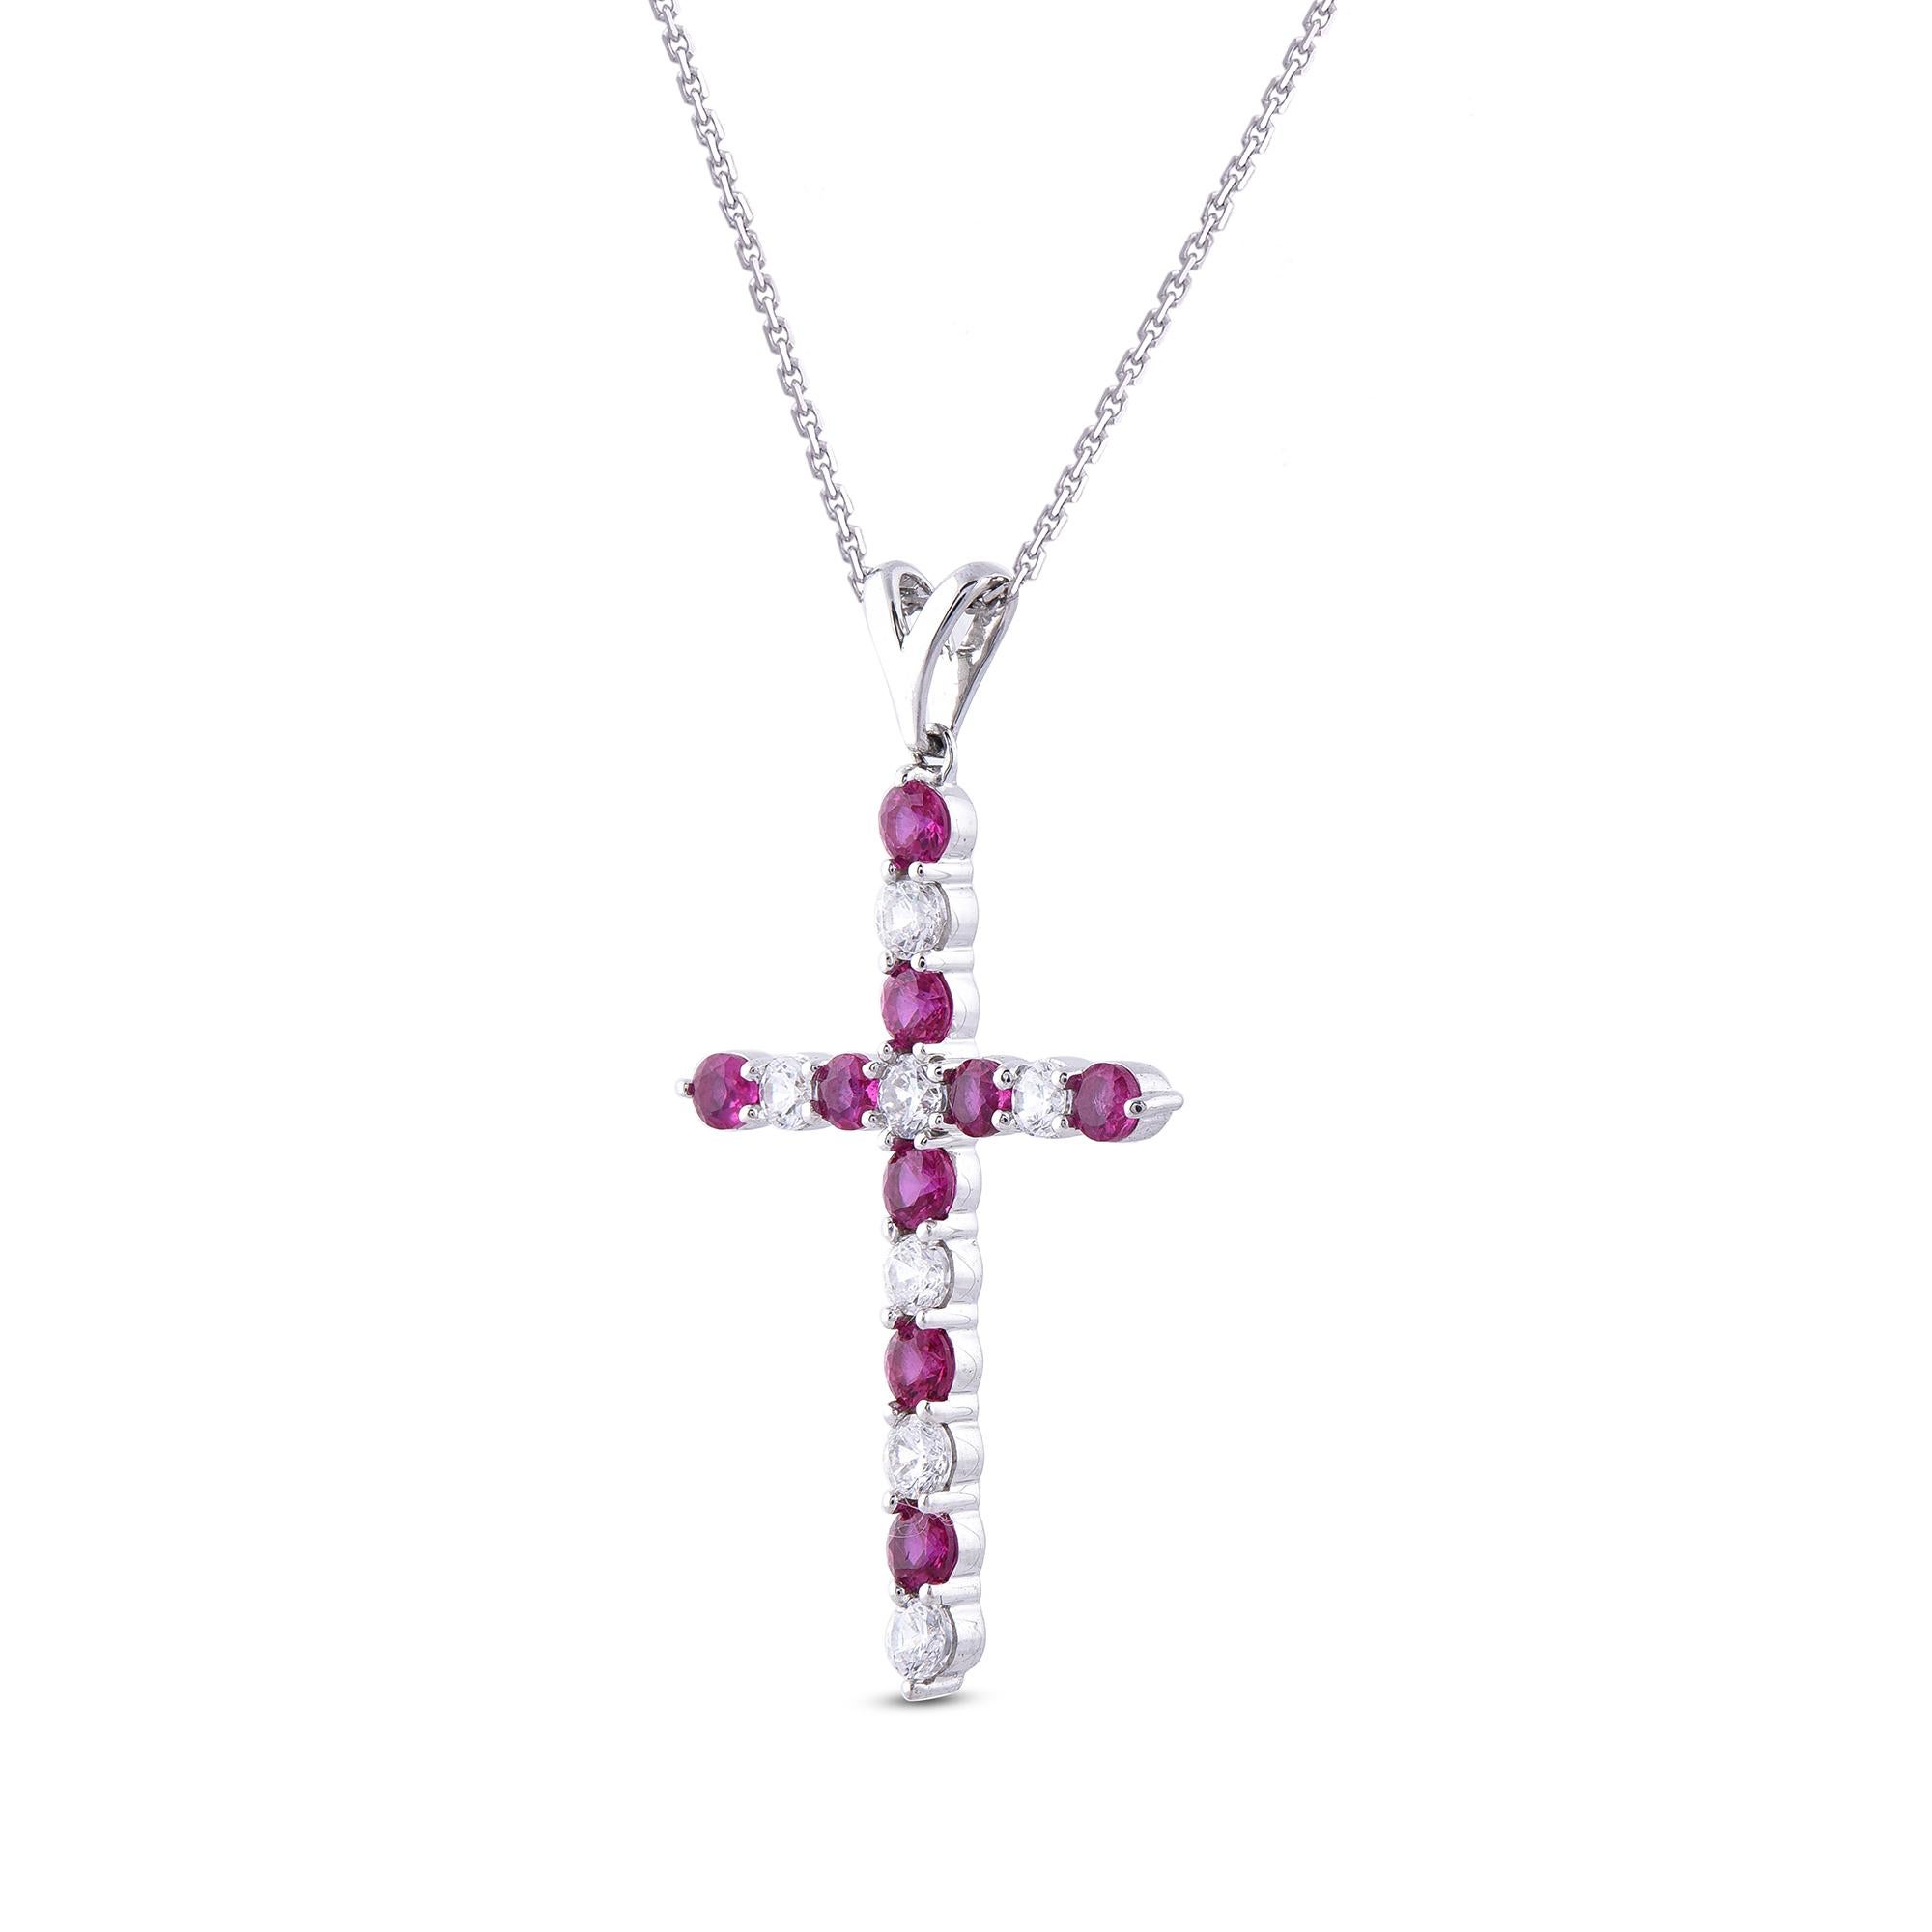 Sparkling and inspired, this diamond cross pendant is certain to be appreciated. The pendant is crafted from 14 karat gold in your choice of white, rose, or yellow, and features 7 round diamond and 9 ruby gemstone set in prong setting. A high polish